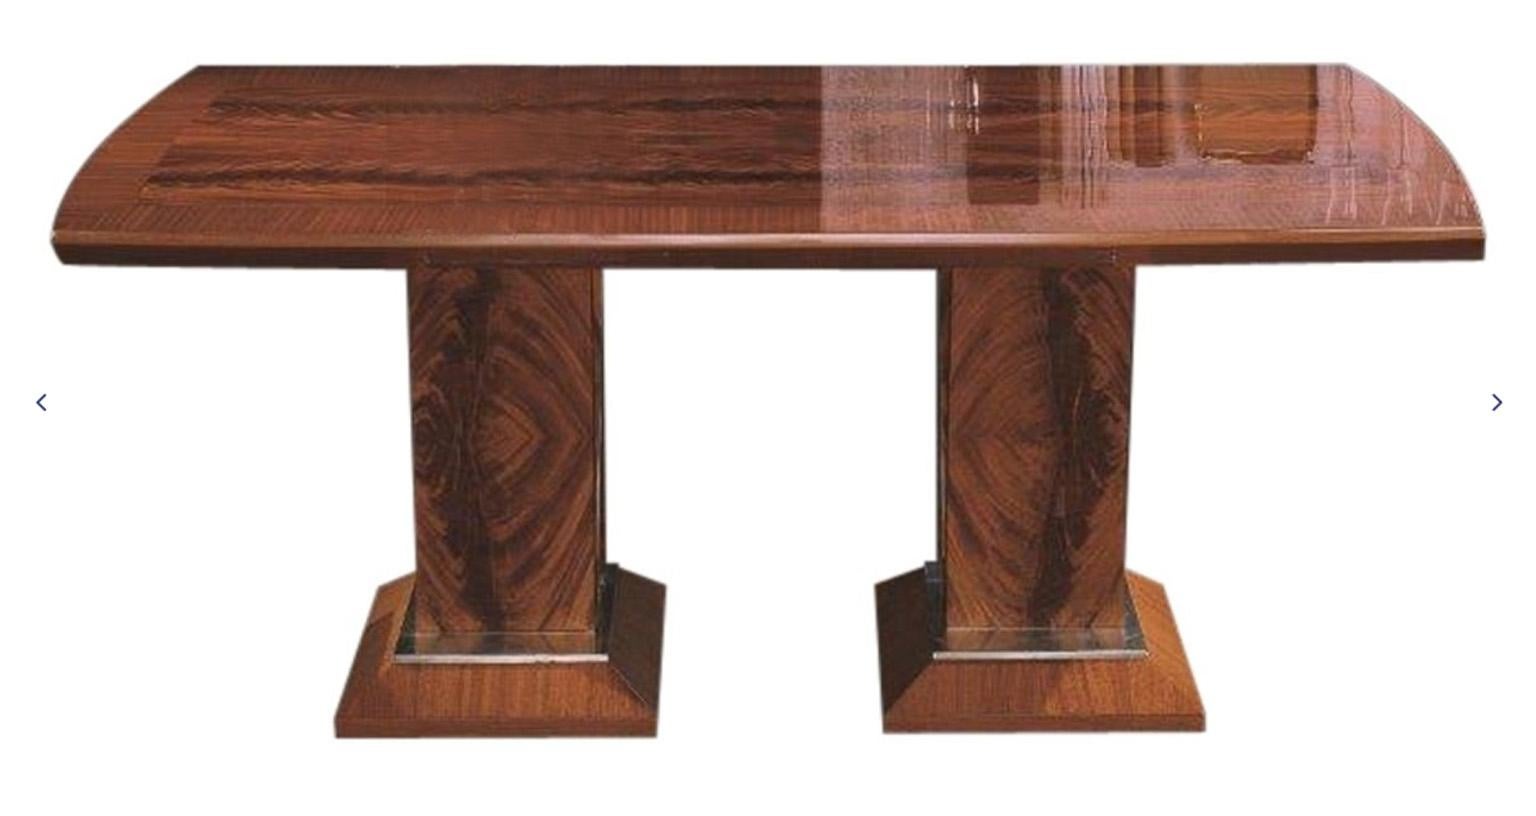 Boat-shape rectangular table with two extension leaves.
Top with combination of crotch mahogany and straight sapele mahogany.
Brushed steel details on the base.
Open table: 112” L x 46” W x 30” H
Close table: 77” L x 46” W x 30” H
Leaf extension: